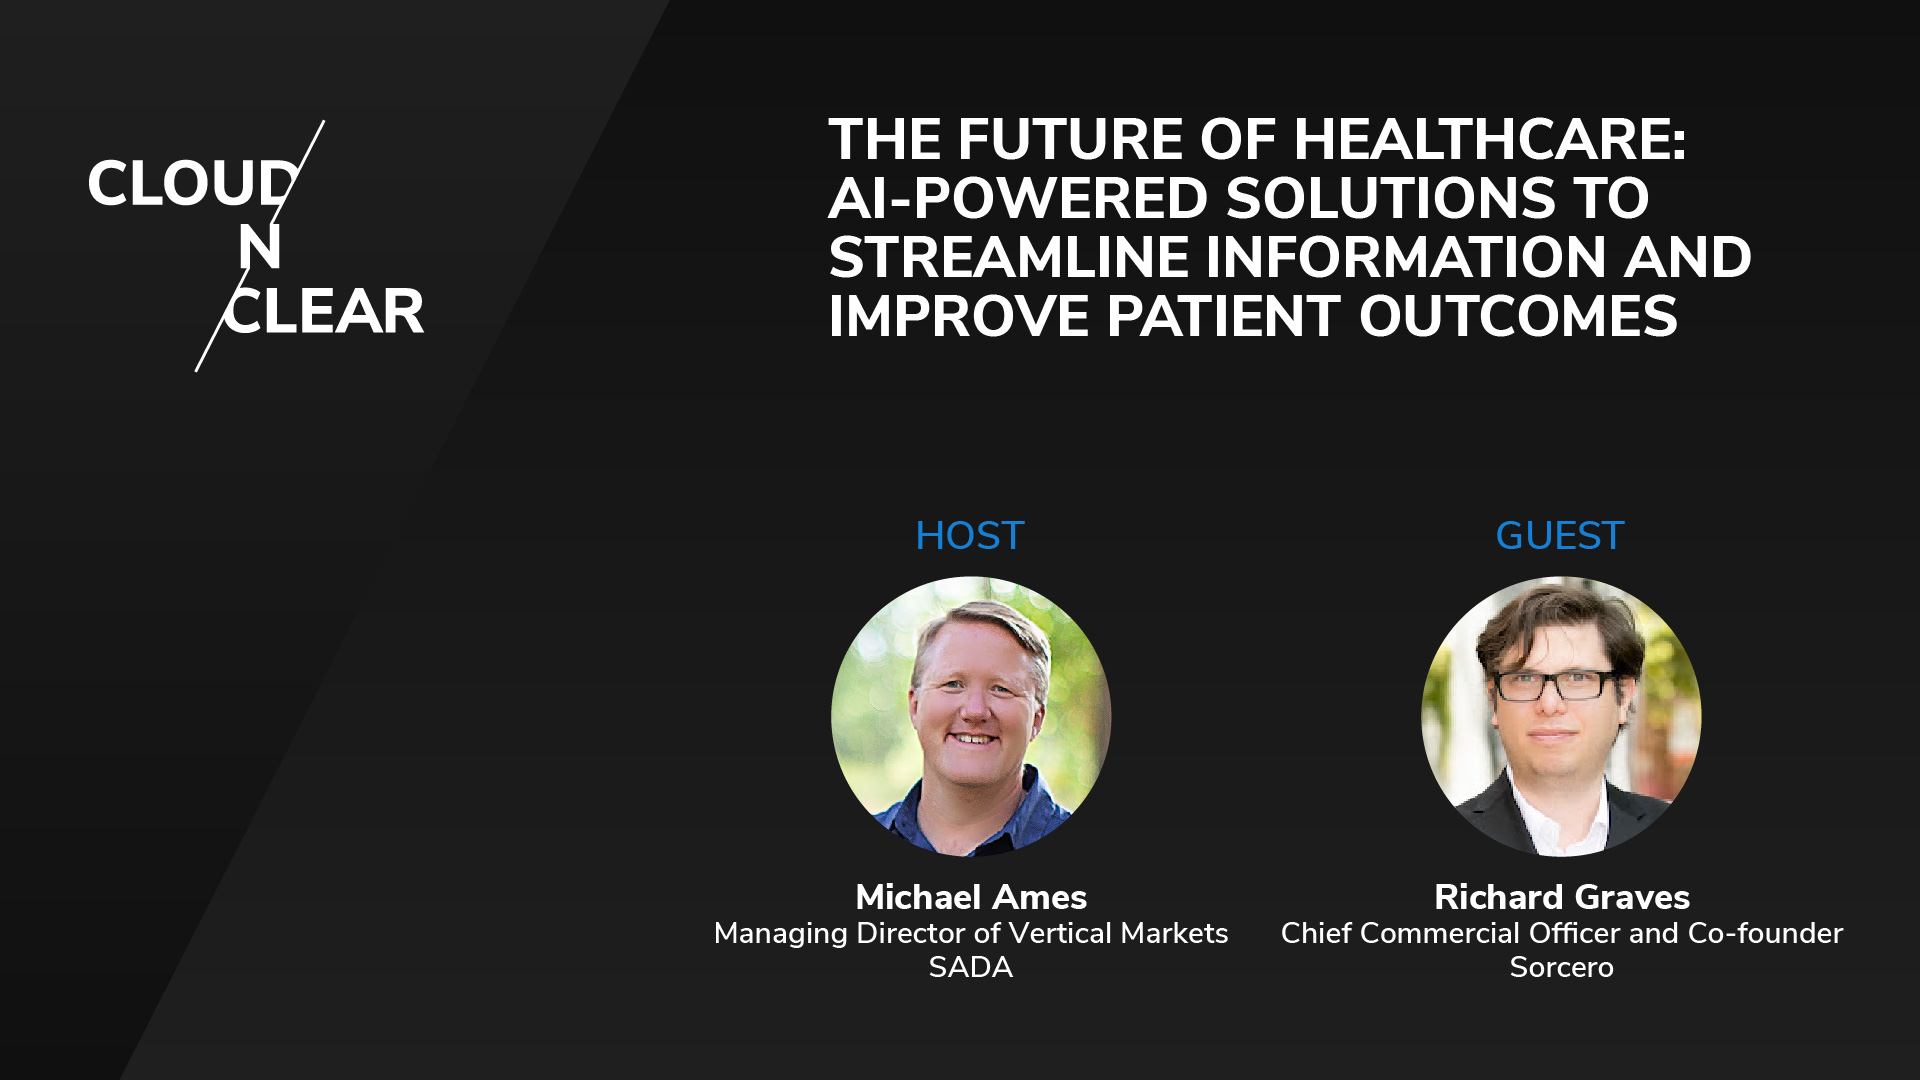 The Future of Healthcare: AI-Powered Solutions to Streamline Information and Improve Patient Outcomes